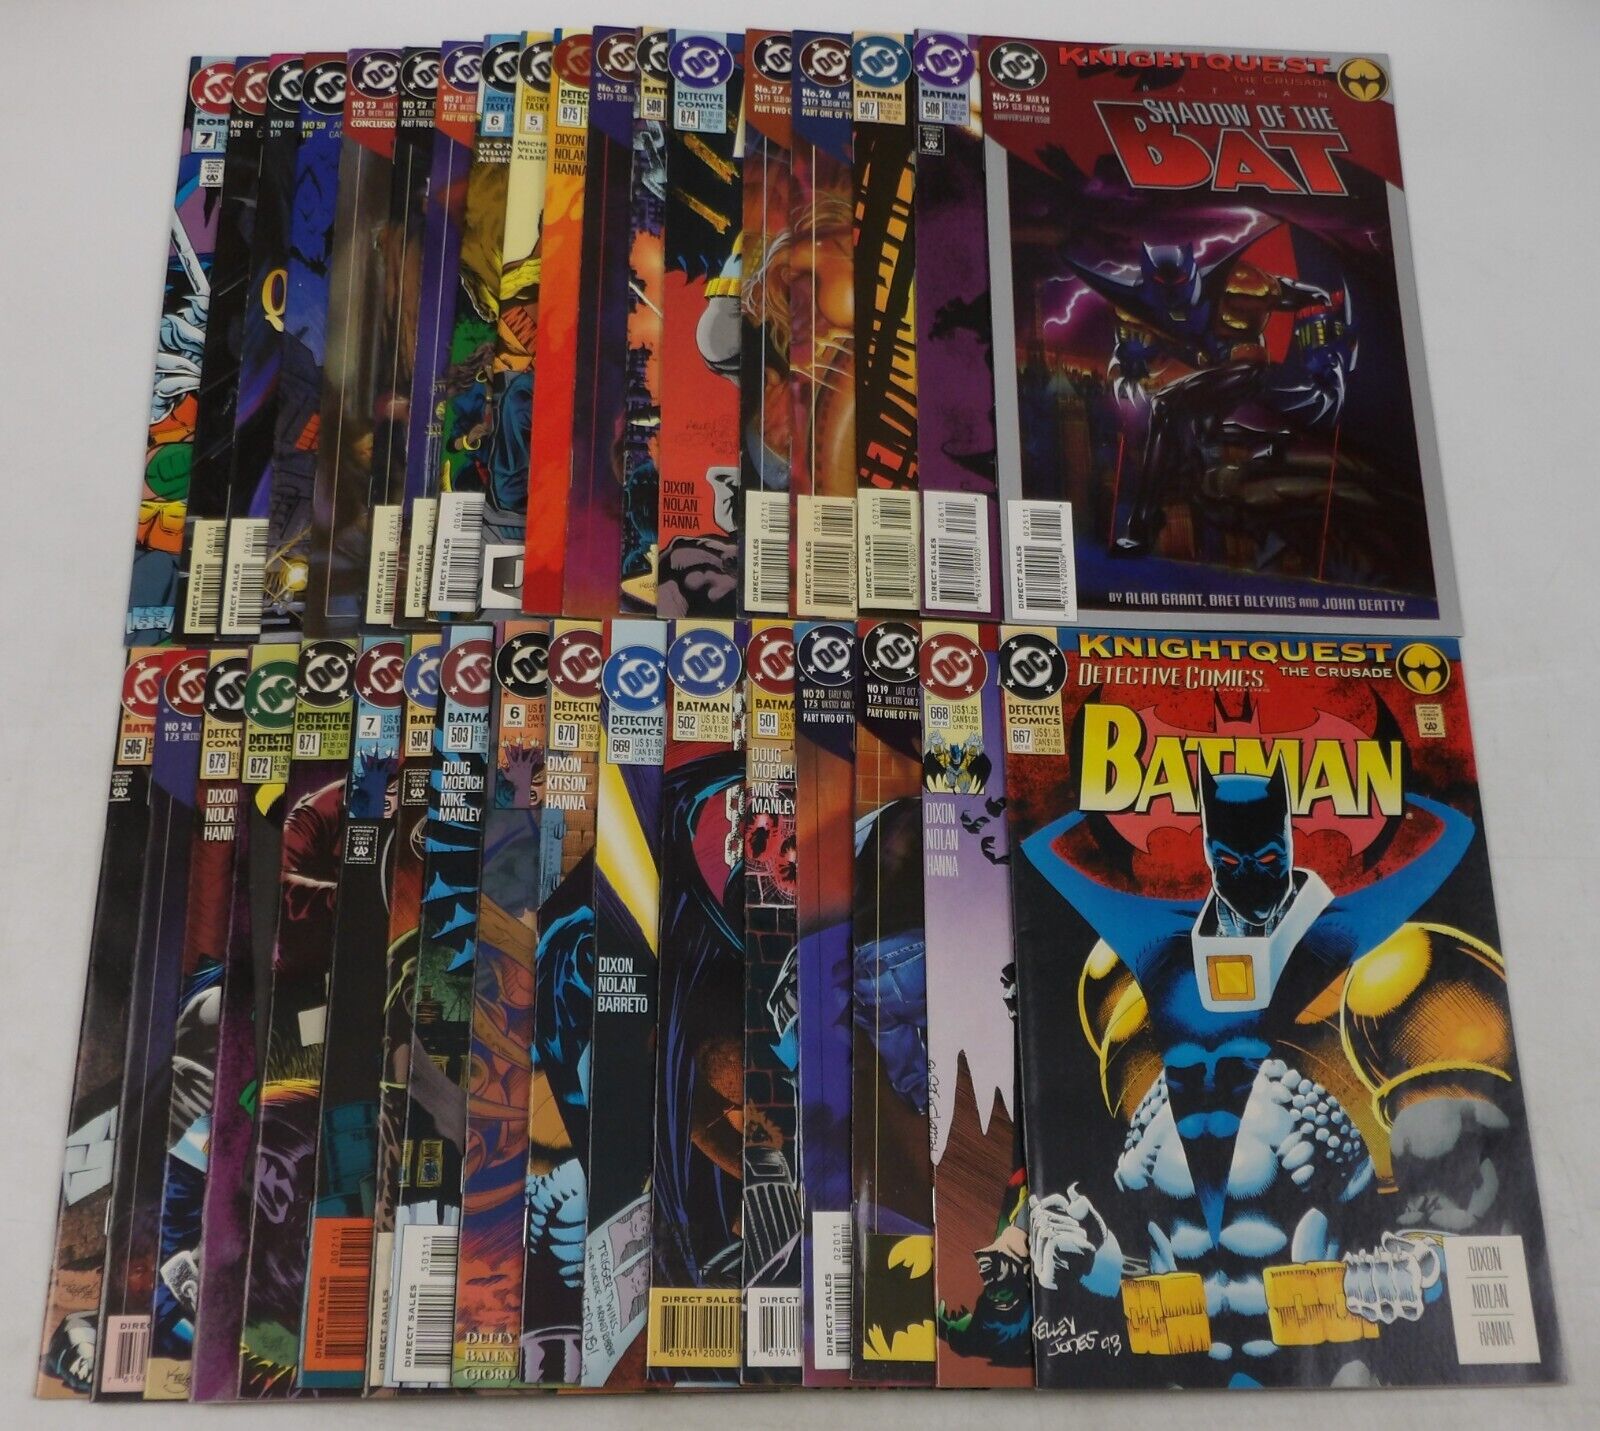 Batman: Knightquest #1-35 VF/NM complete crossover story Crusade Search DC